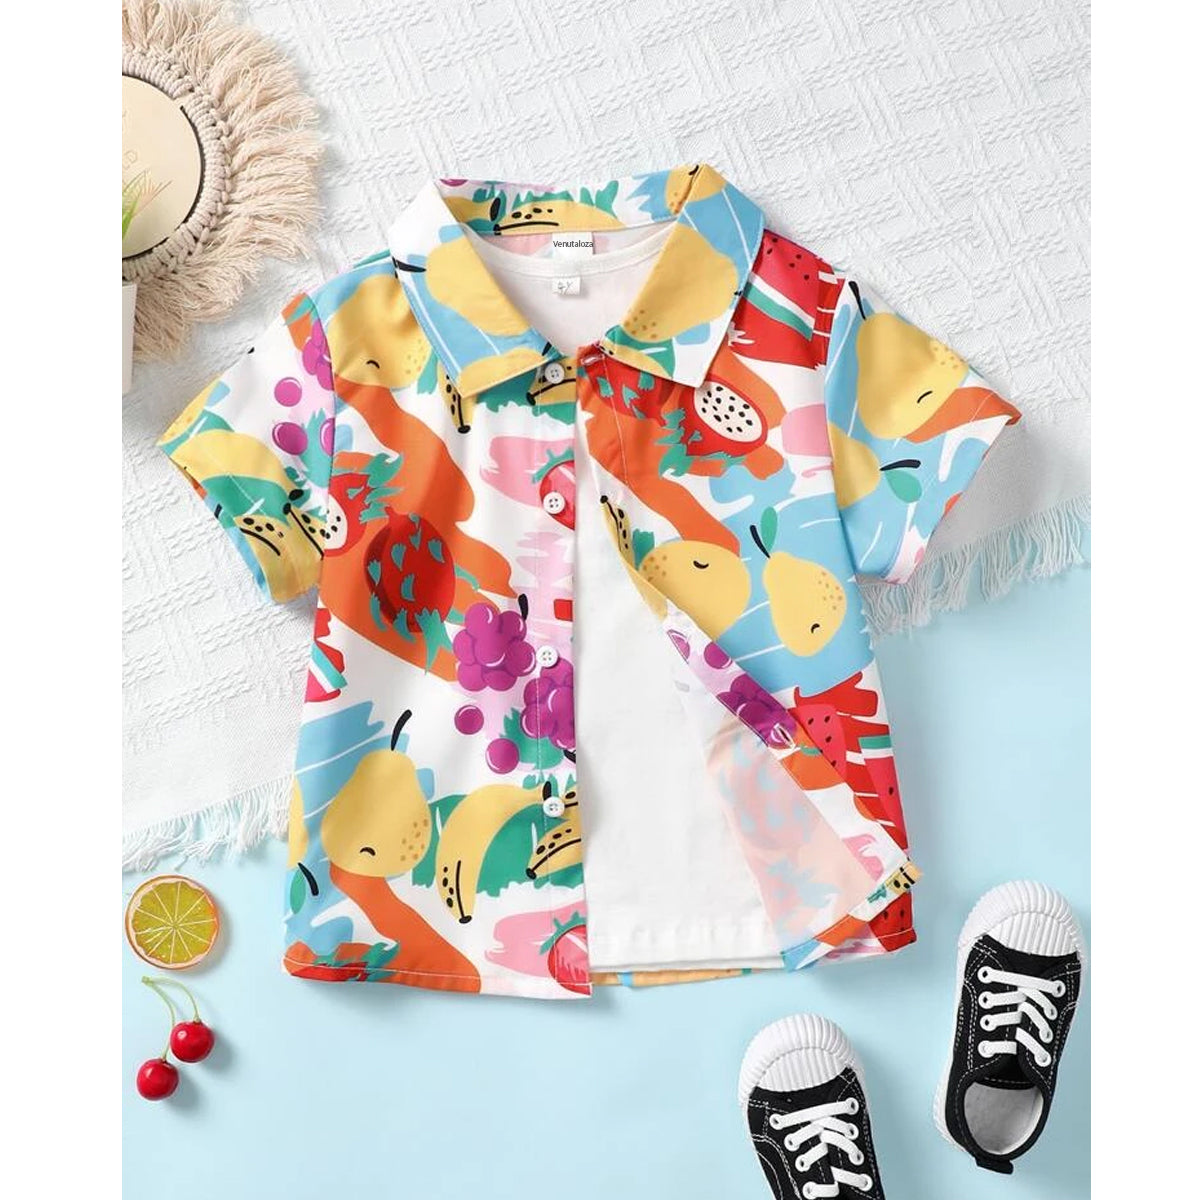 Venutaloza Boy's London City & Coconut Tree and Fruits Designer Button Front (Combo Pack Of 3) Shirt For Boy.